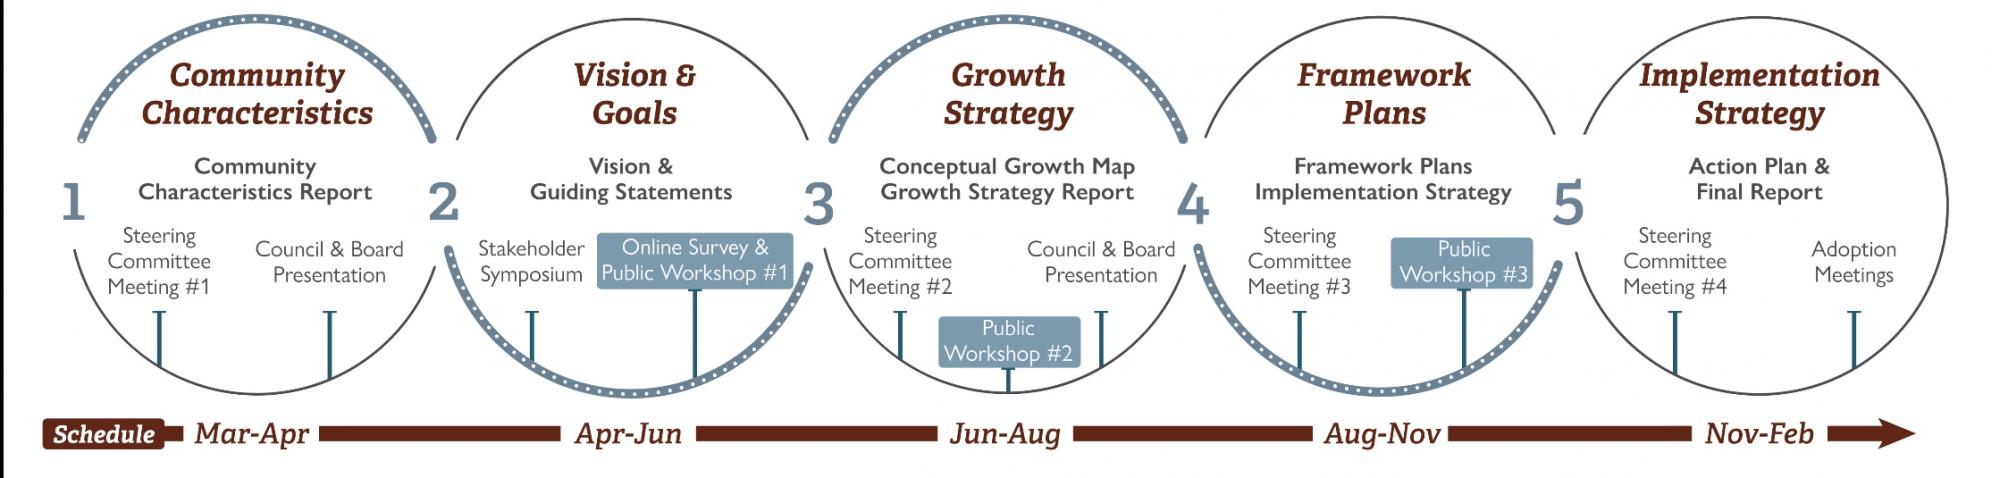 Comprehensive Plan Process and Schedule